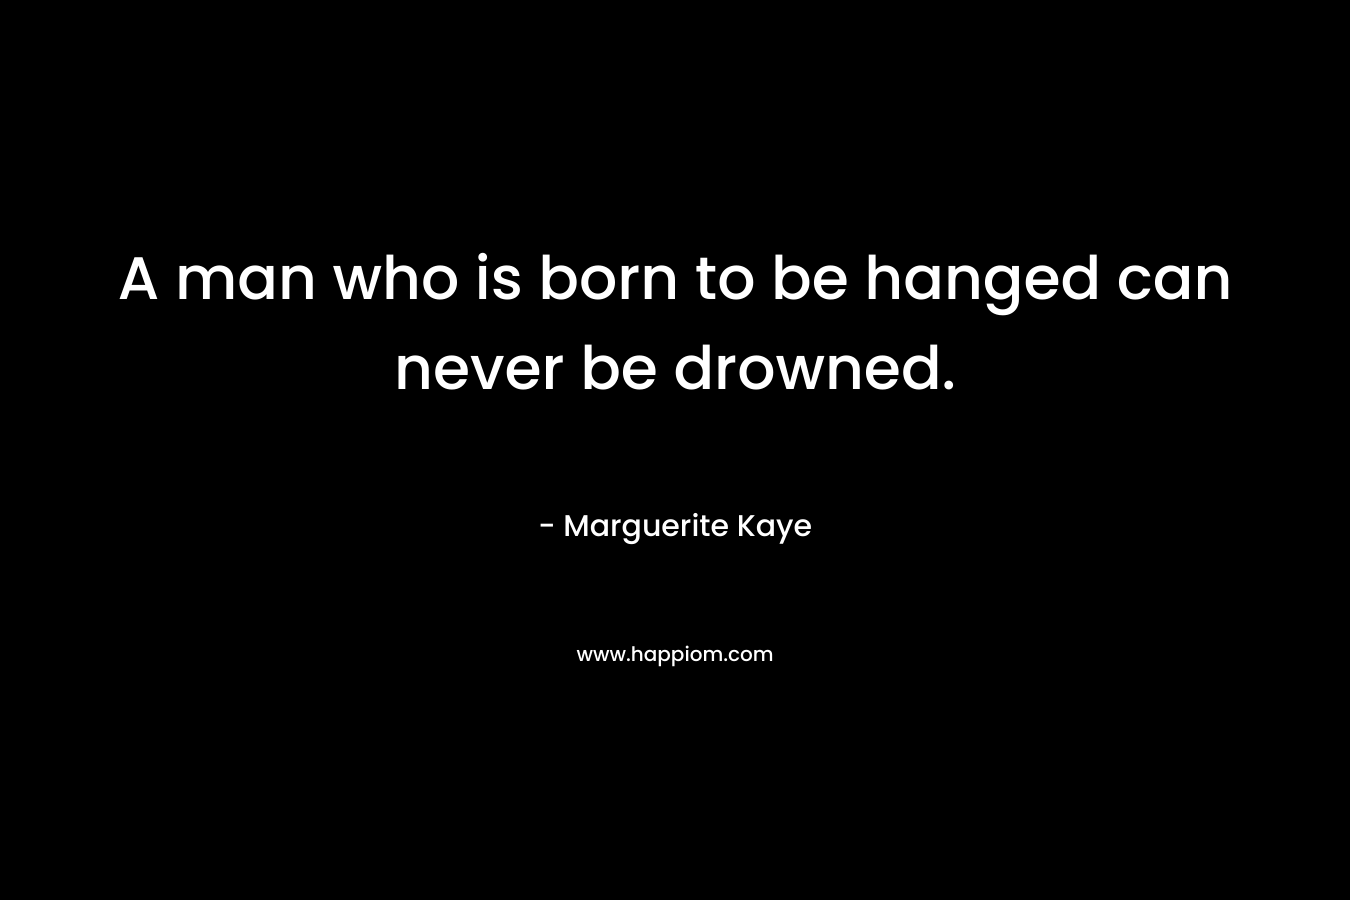 A man who is born to be hanged can never be drowned.